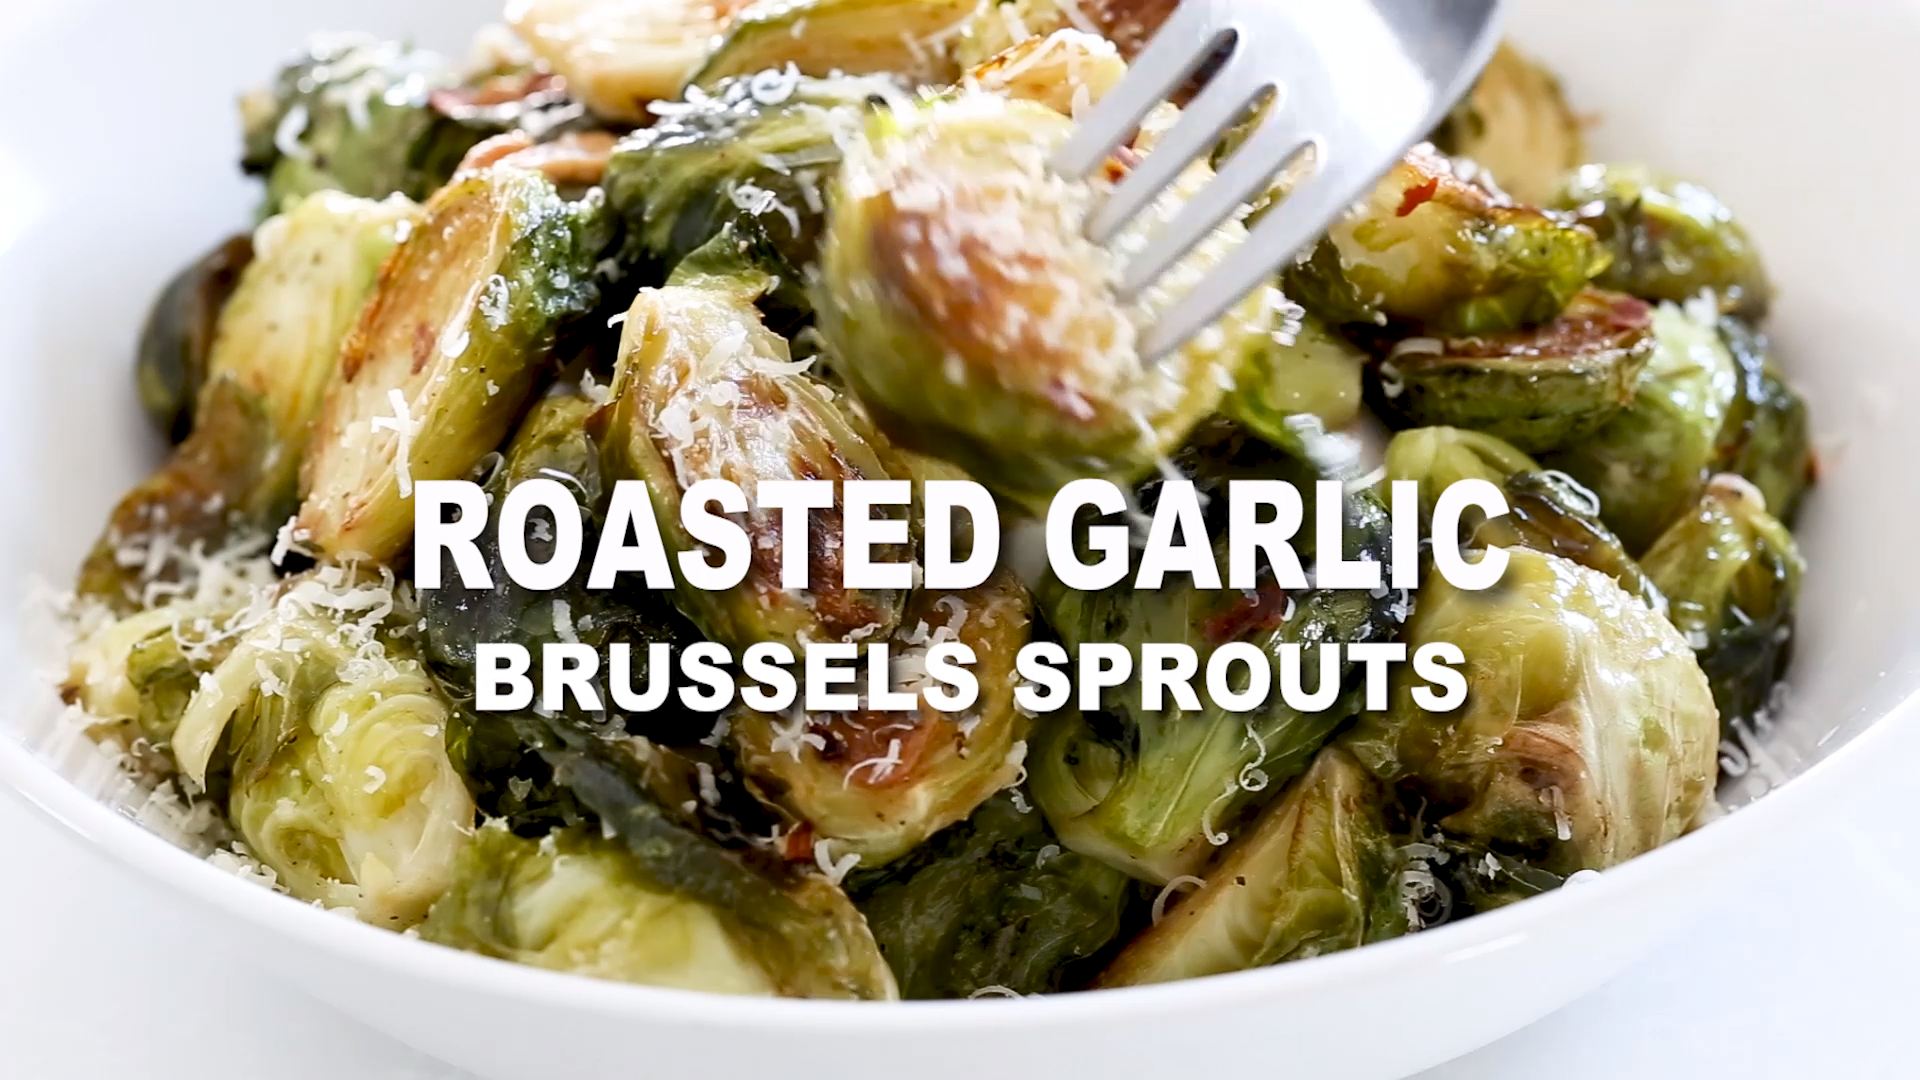 Roasted Garlic Brussels Sprouts - Roasted Garlic Brussels Sprouts -   19 healthy thanksgiving sides low carb ideas